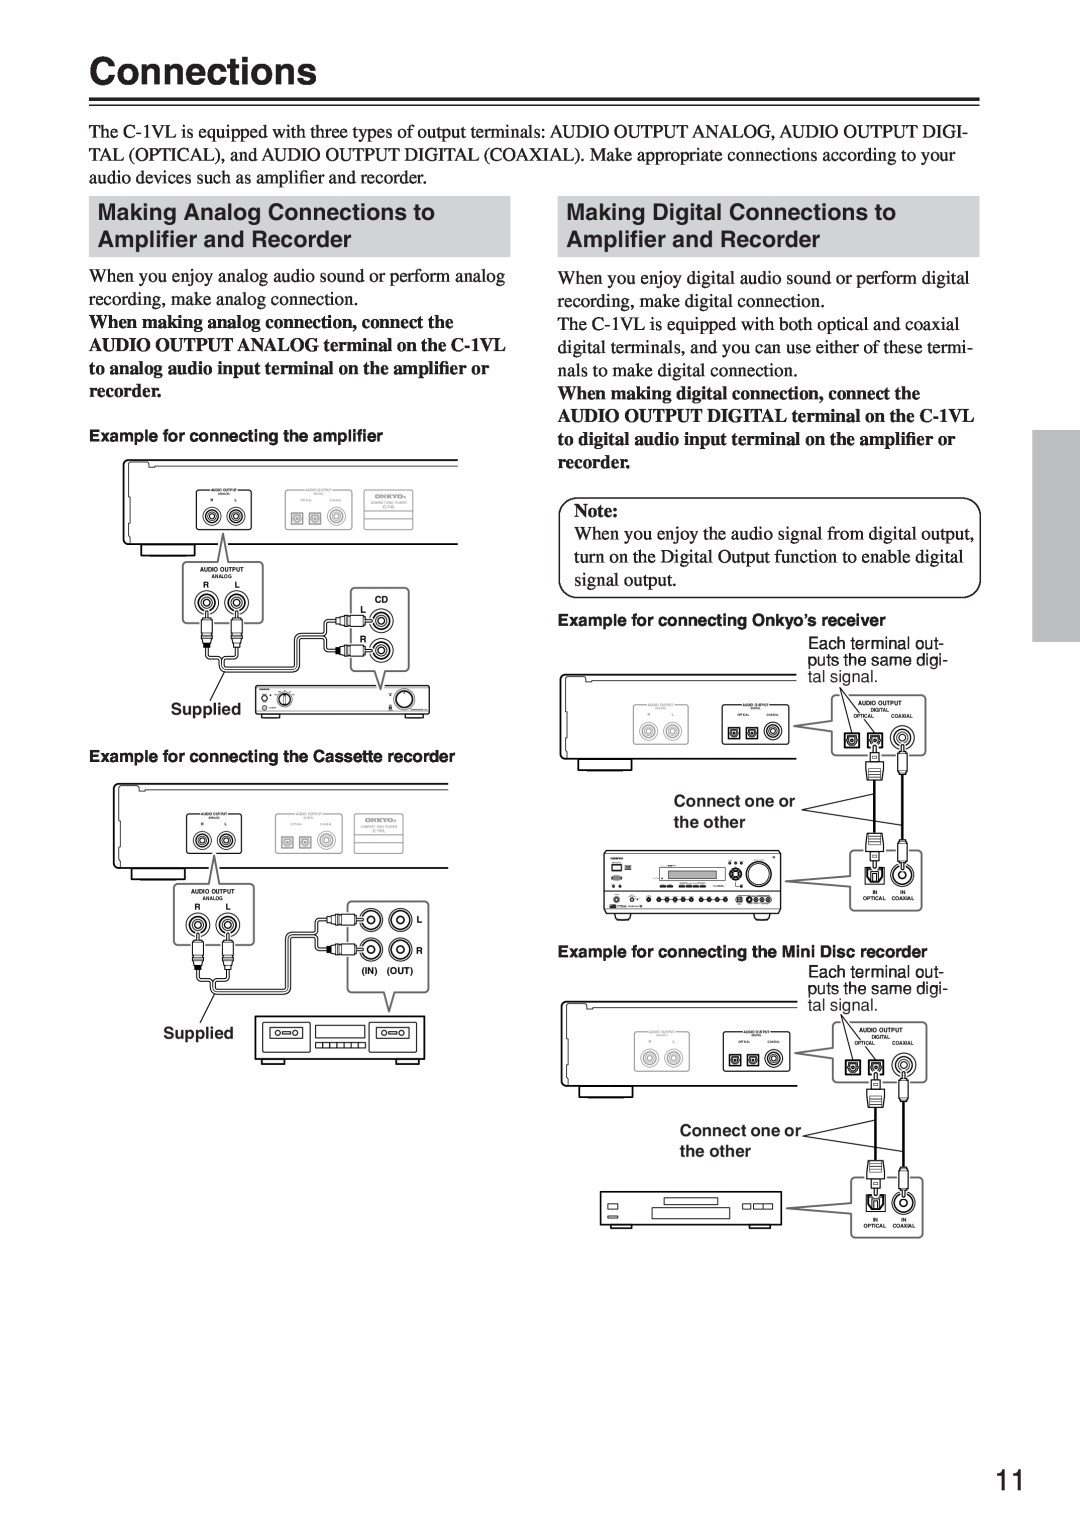 Onkyo C-1VL instruction manual Making Digital Connections to, Ampliﬁer and Recorder 